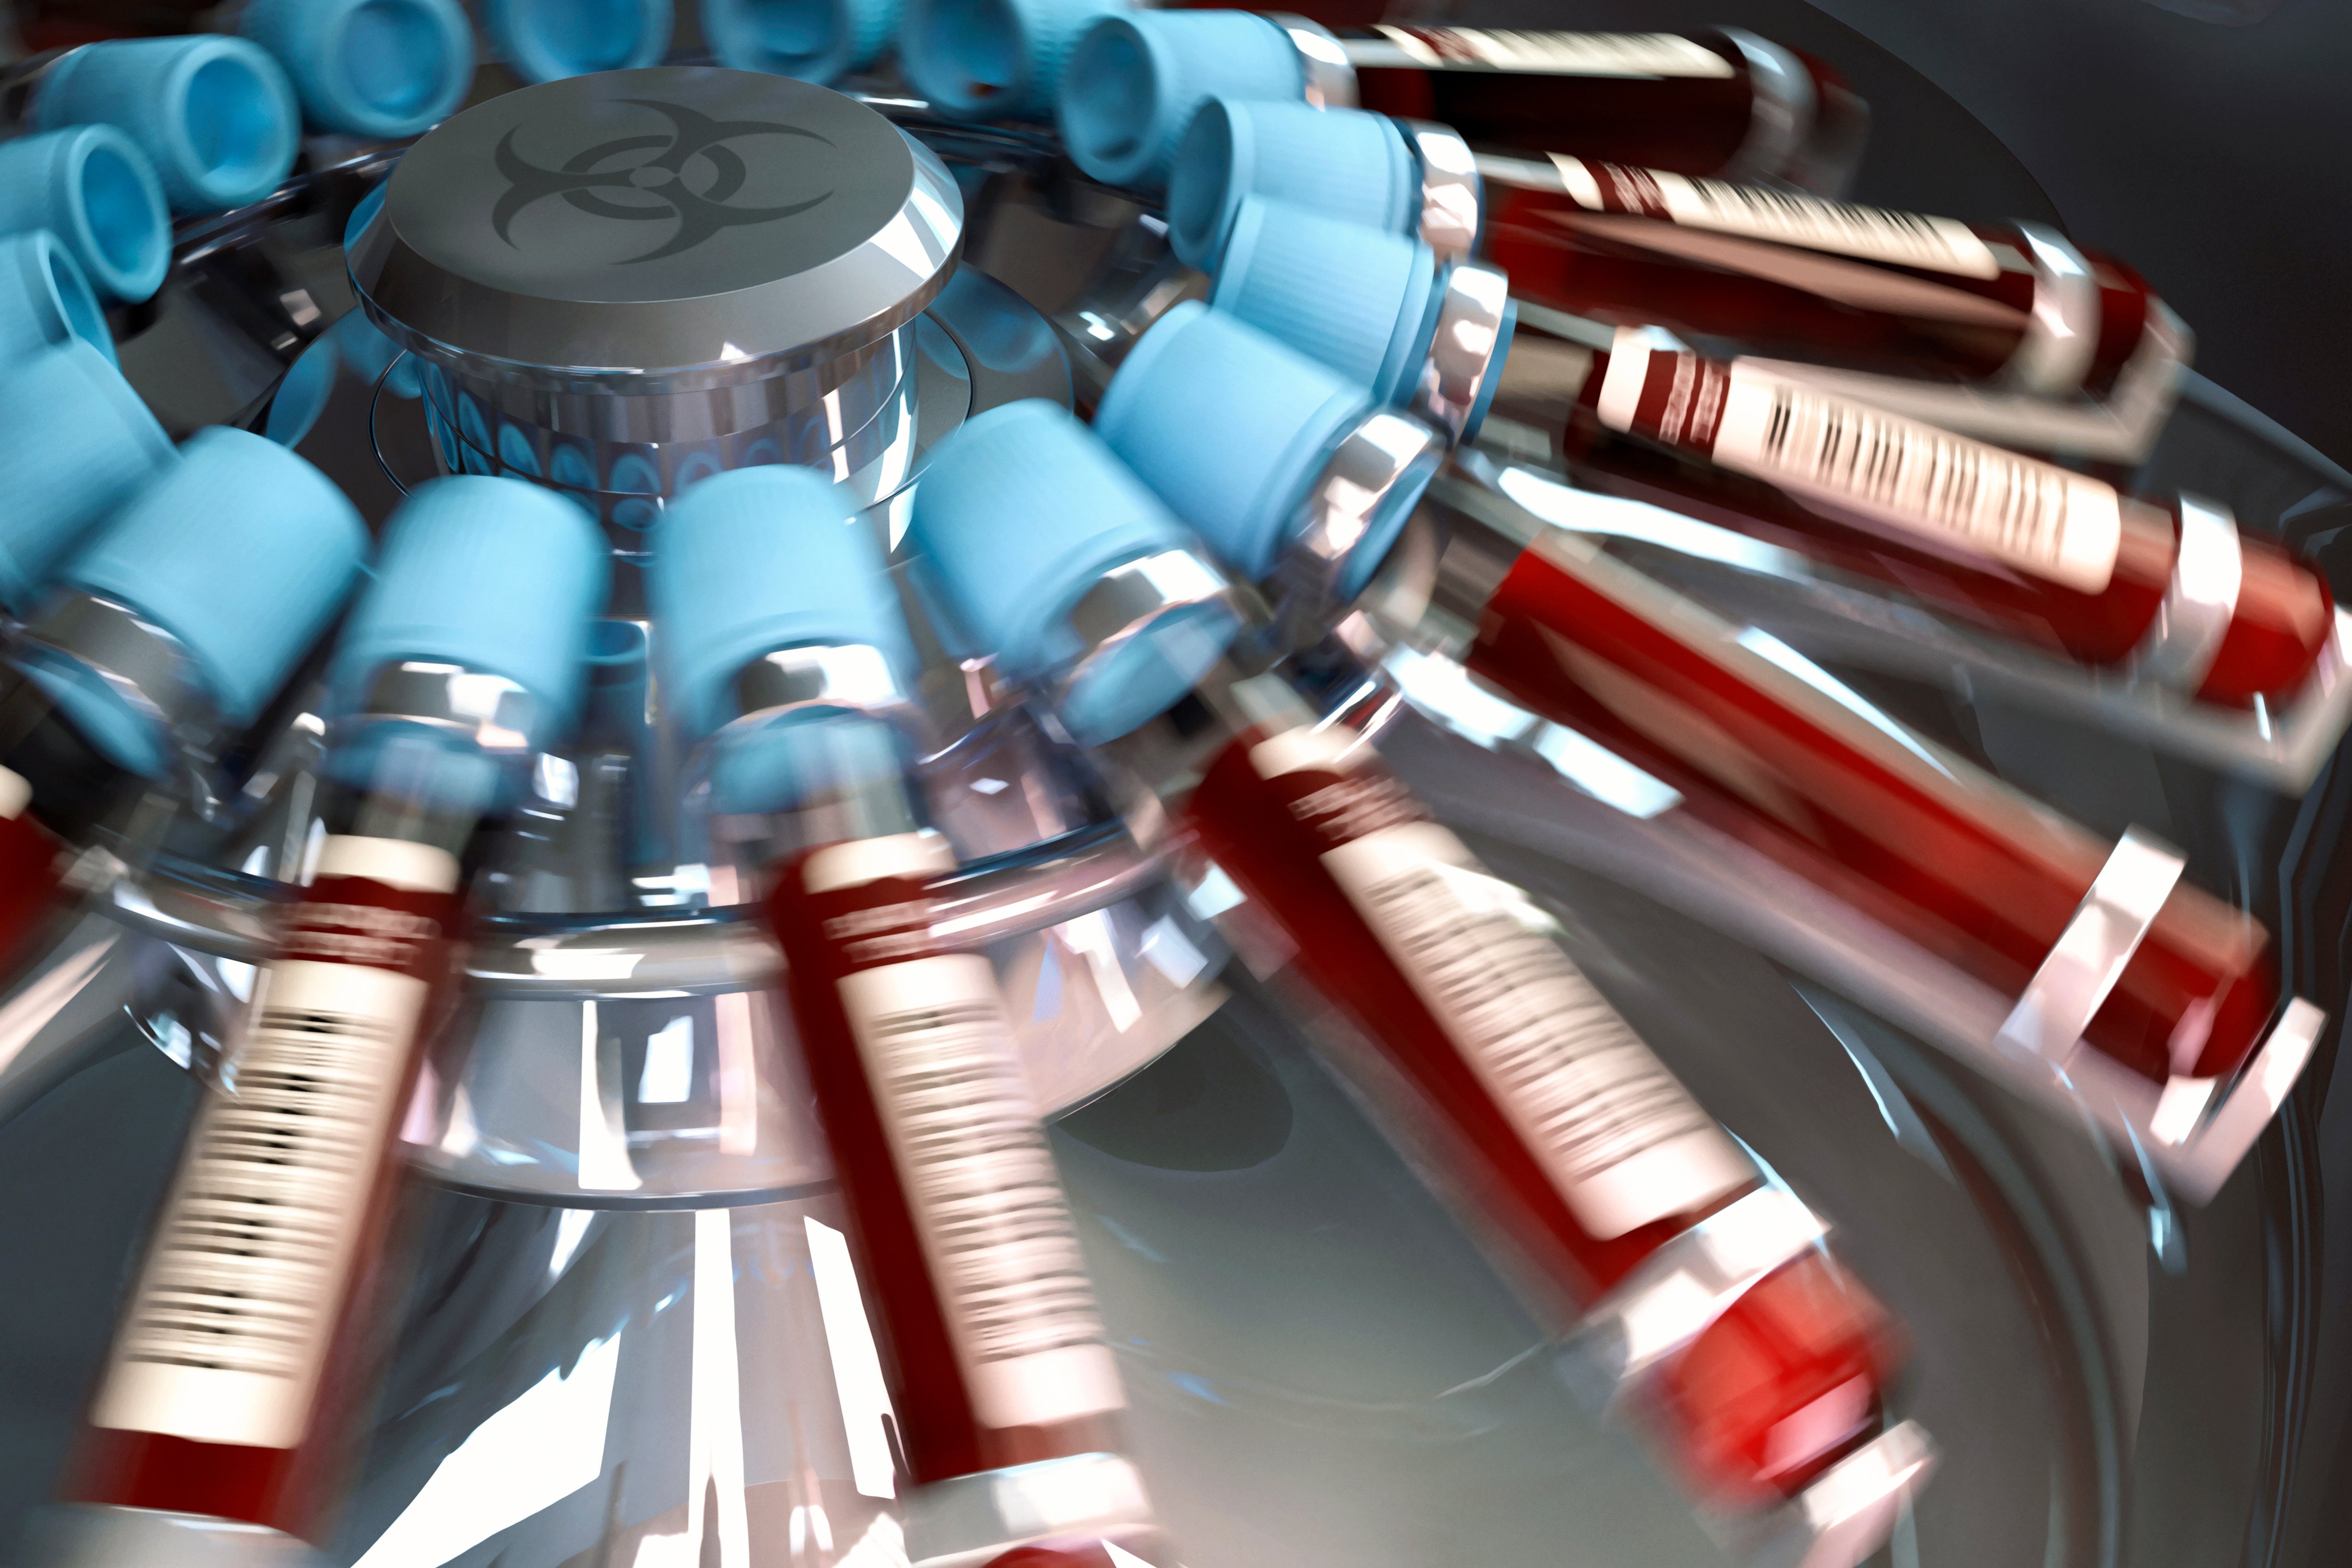 3D illustration of blood samples in vials on a centrifuge machine with motion blur from rotation